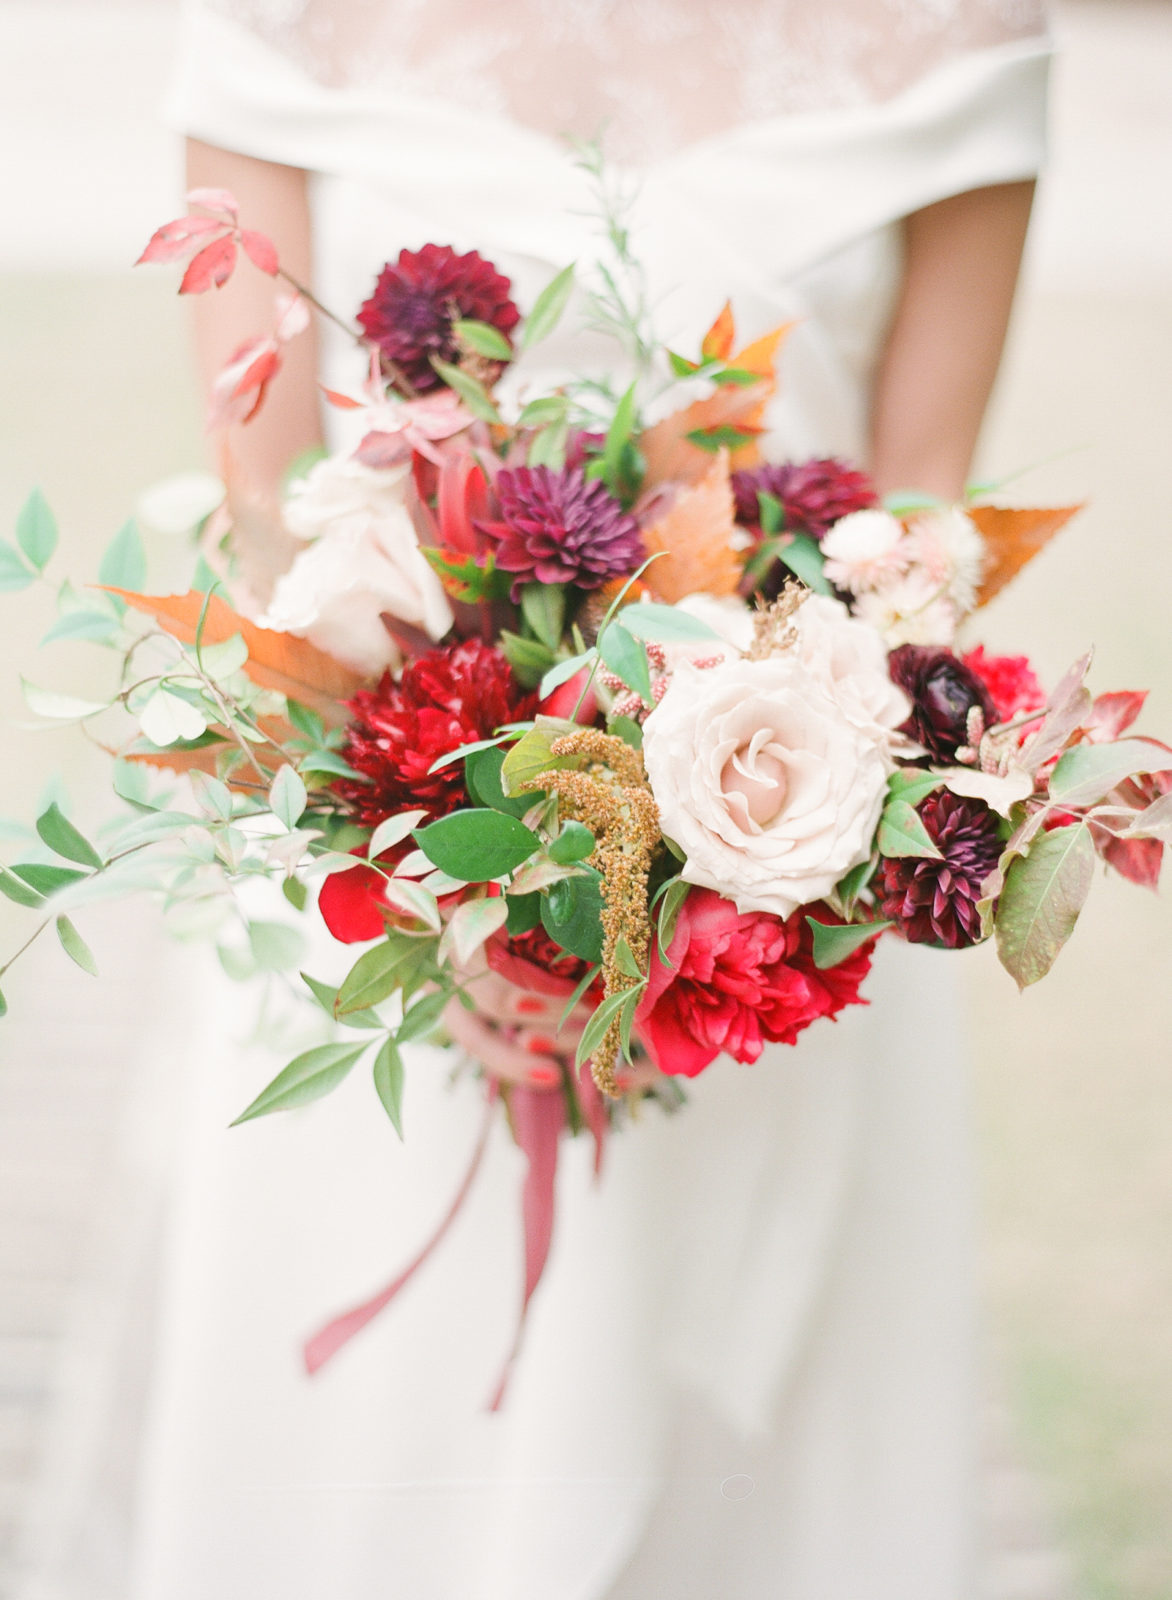 Best Wedding Bouquets of 2018 | Fine Art Wedding Photography | Film Wedding Photography | Molly Carr Photography | Red and Pink Bridal Bouquet | Legare Waring House Wedding